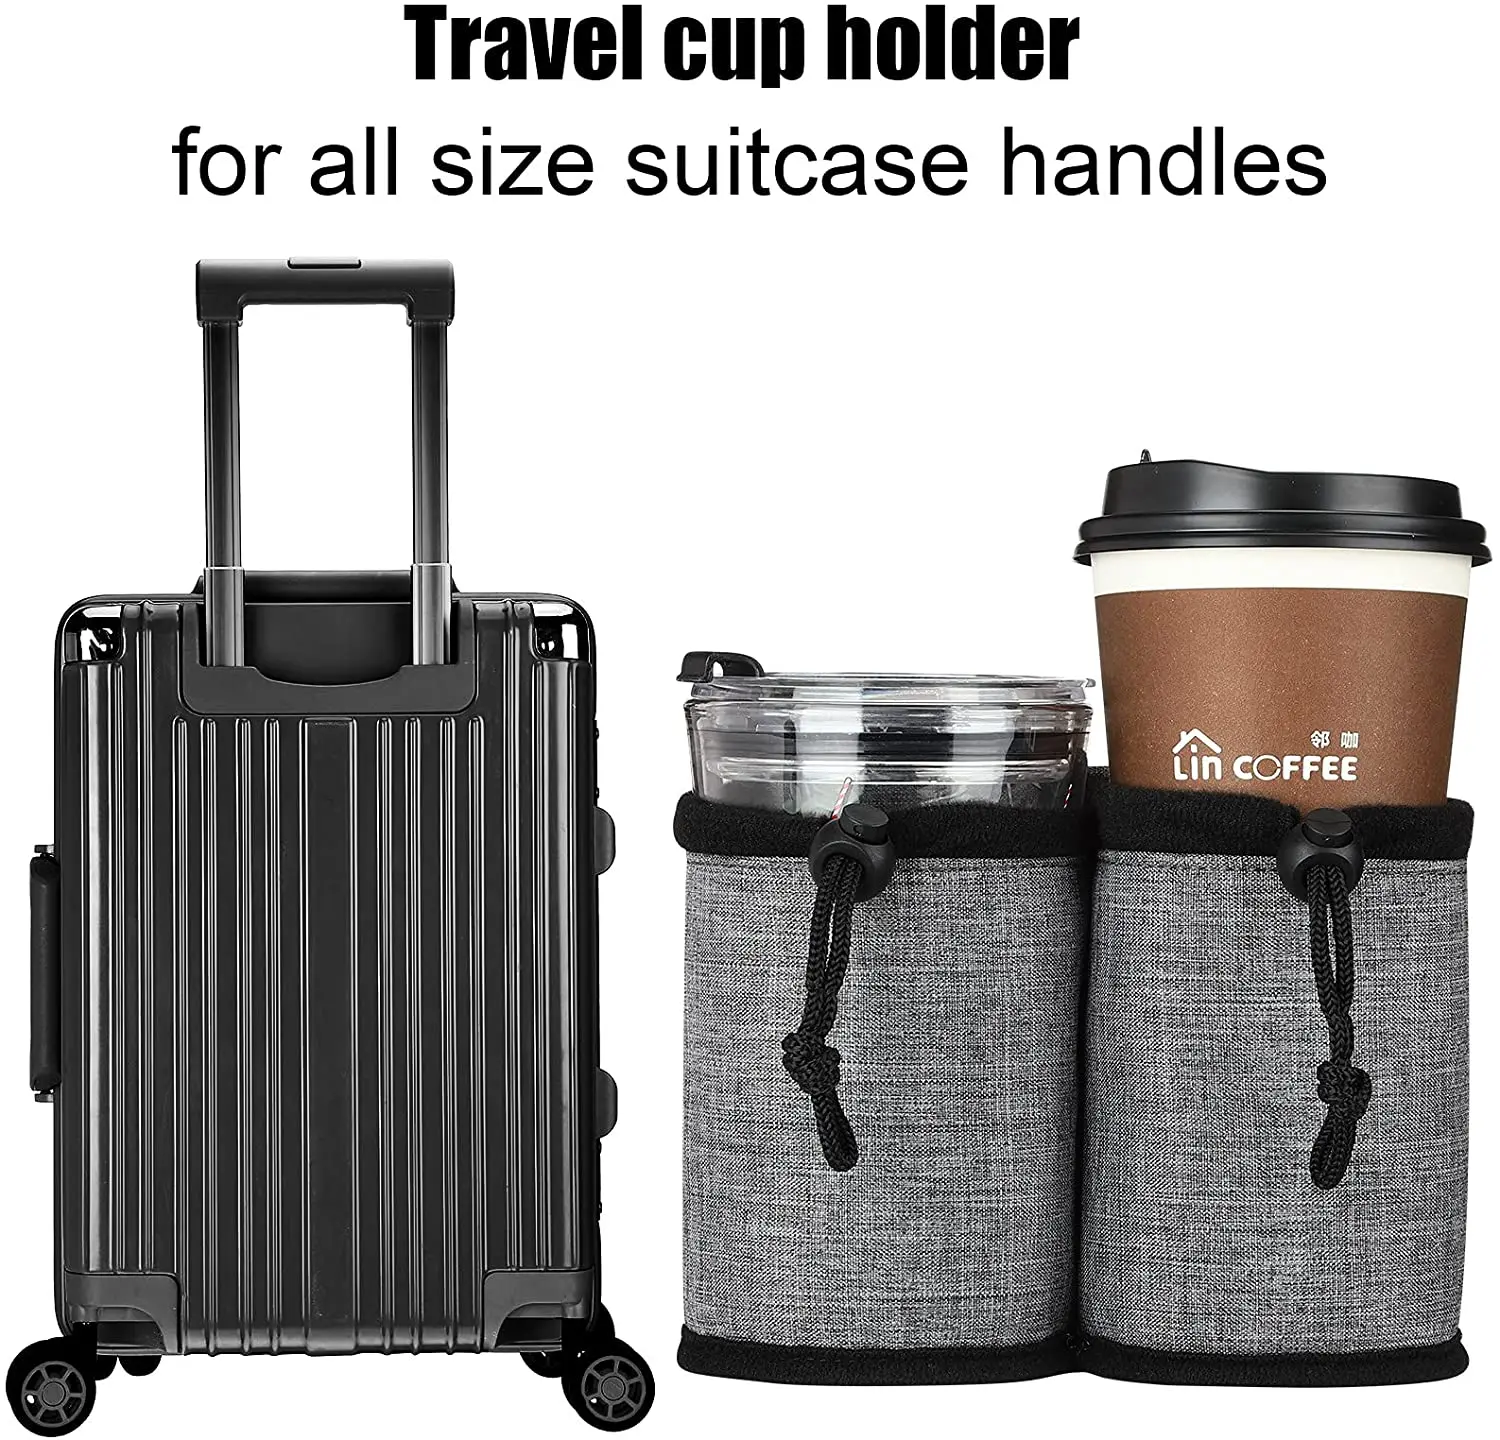 Freehand travel cup holder works on suitcases